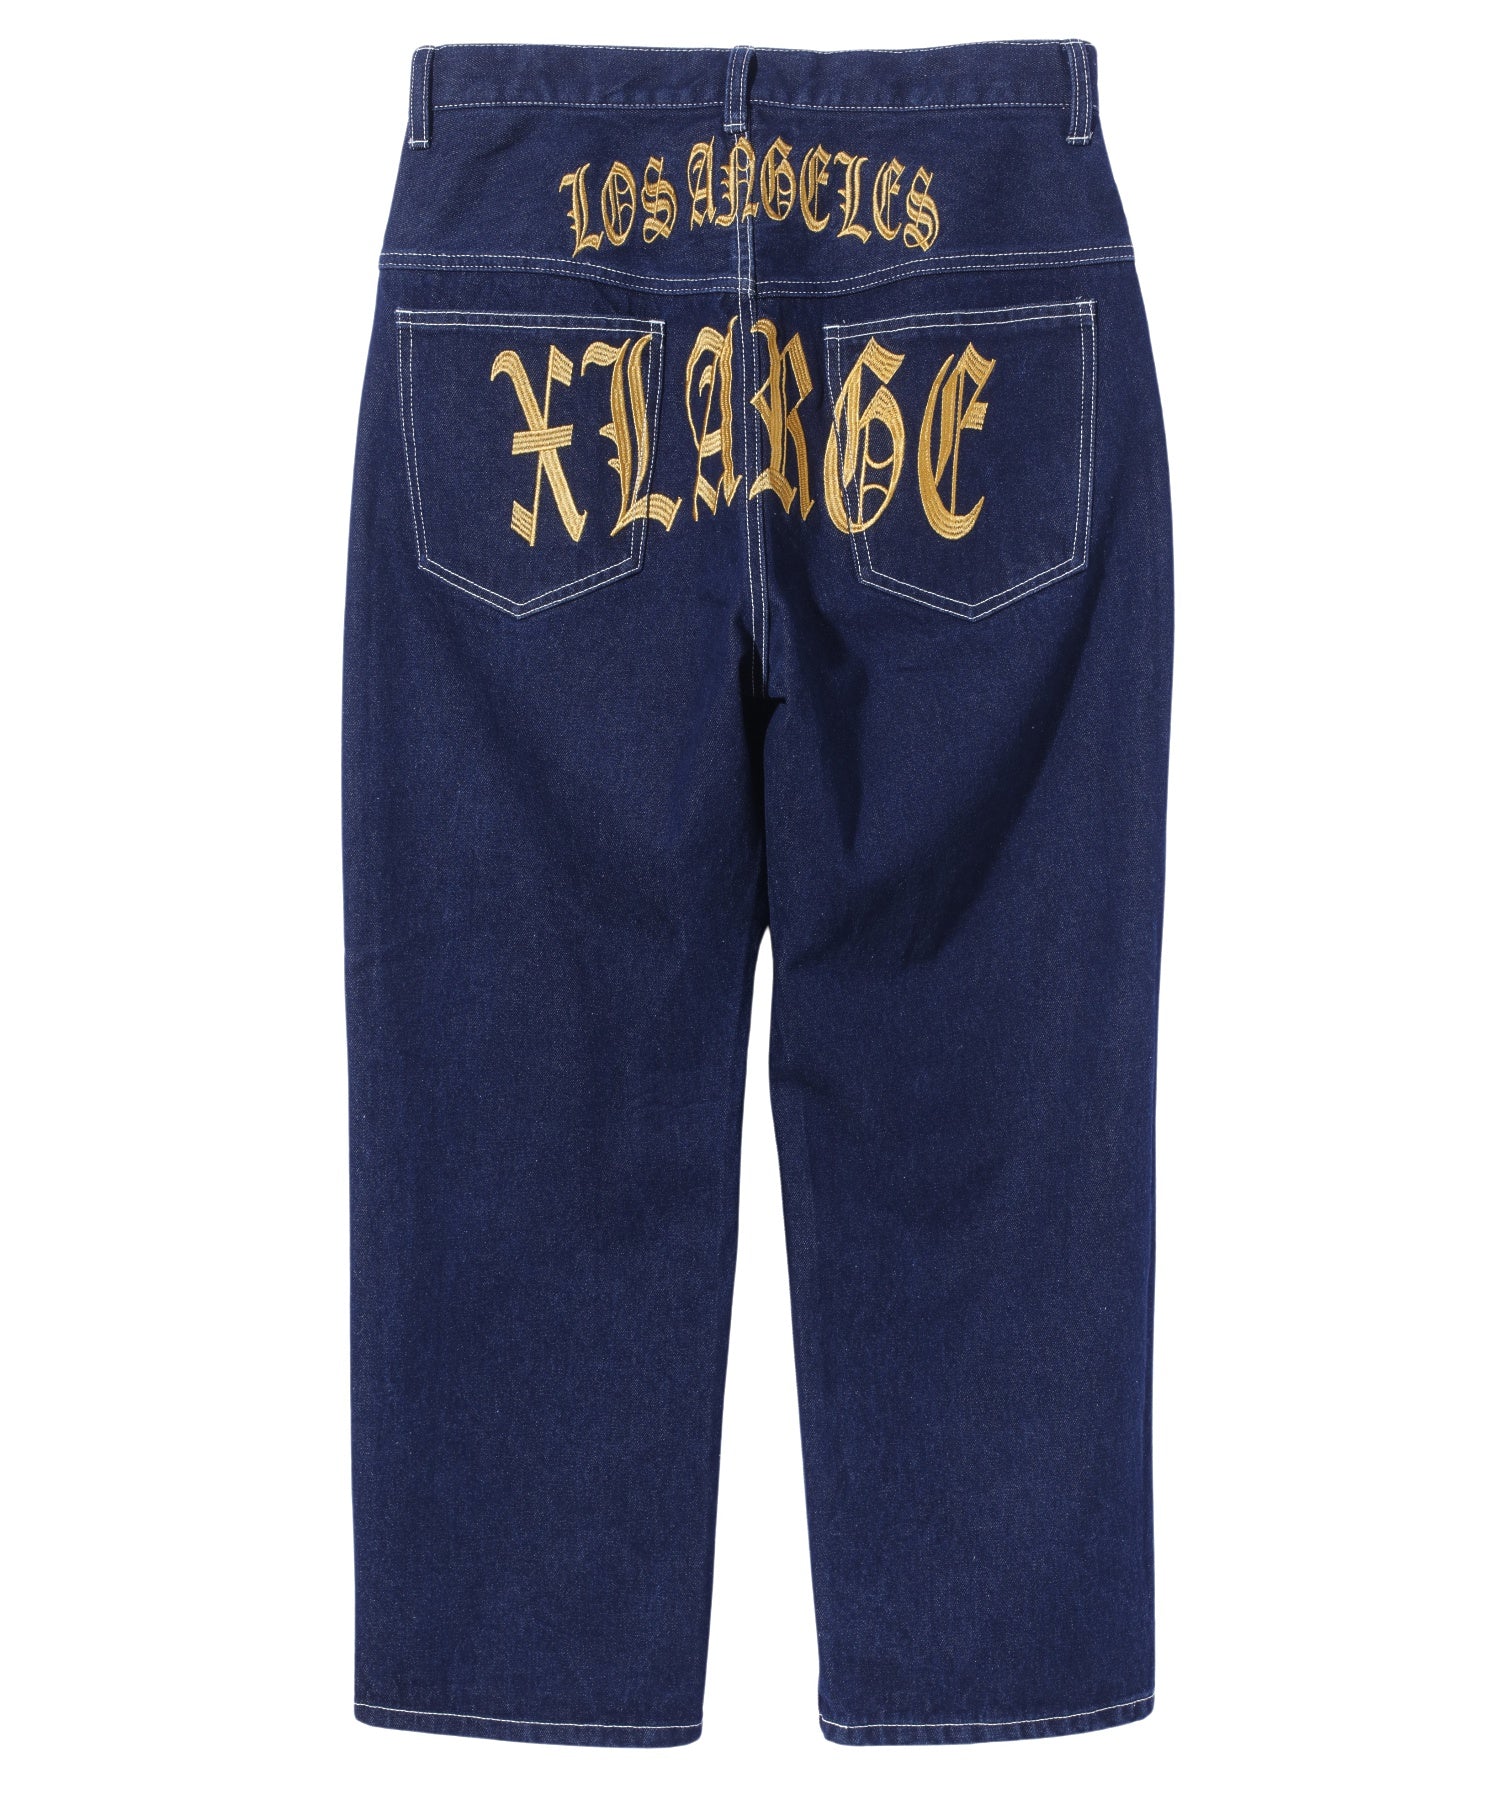 Palm Angels - Blue jeans with a logo pattern PWYB034F23DEN001 - buy with  Czech Republic delivery at Symbol